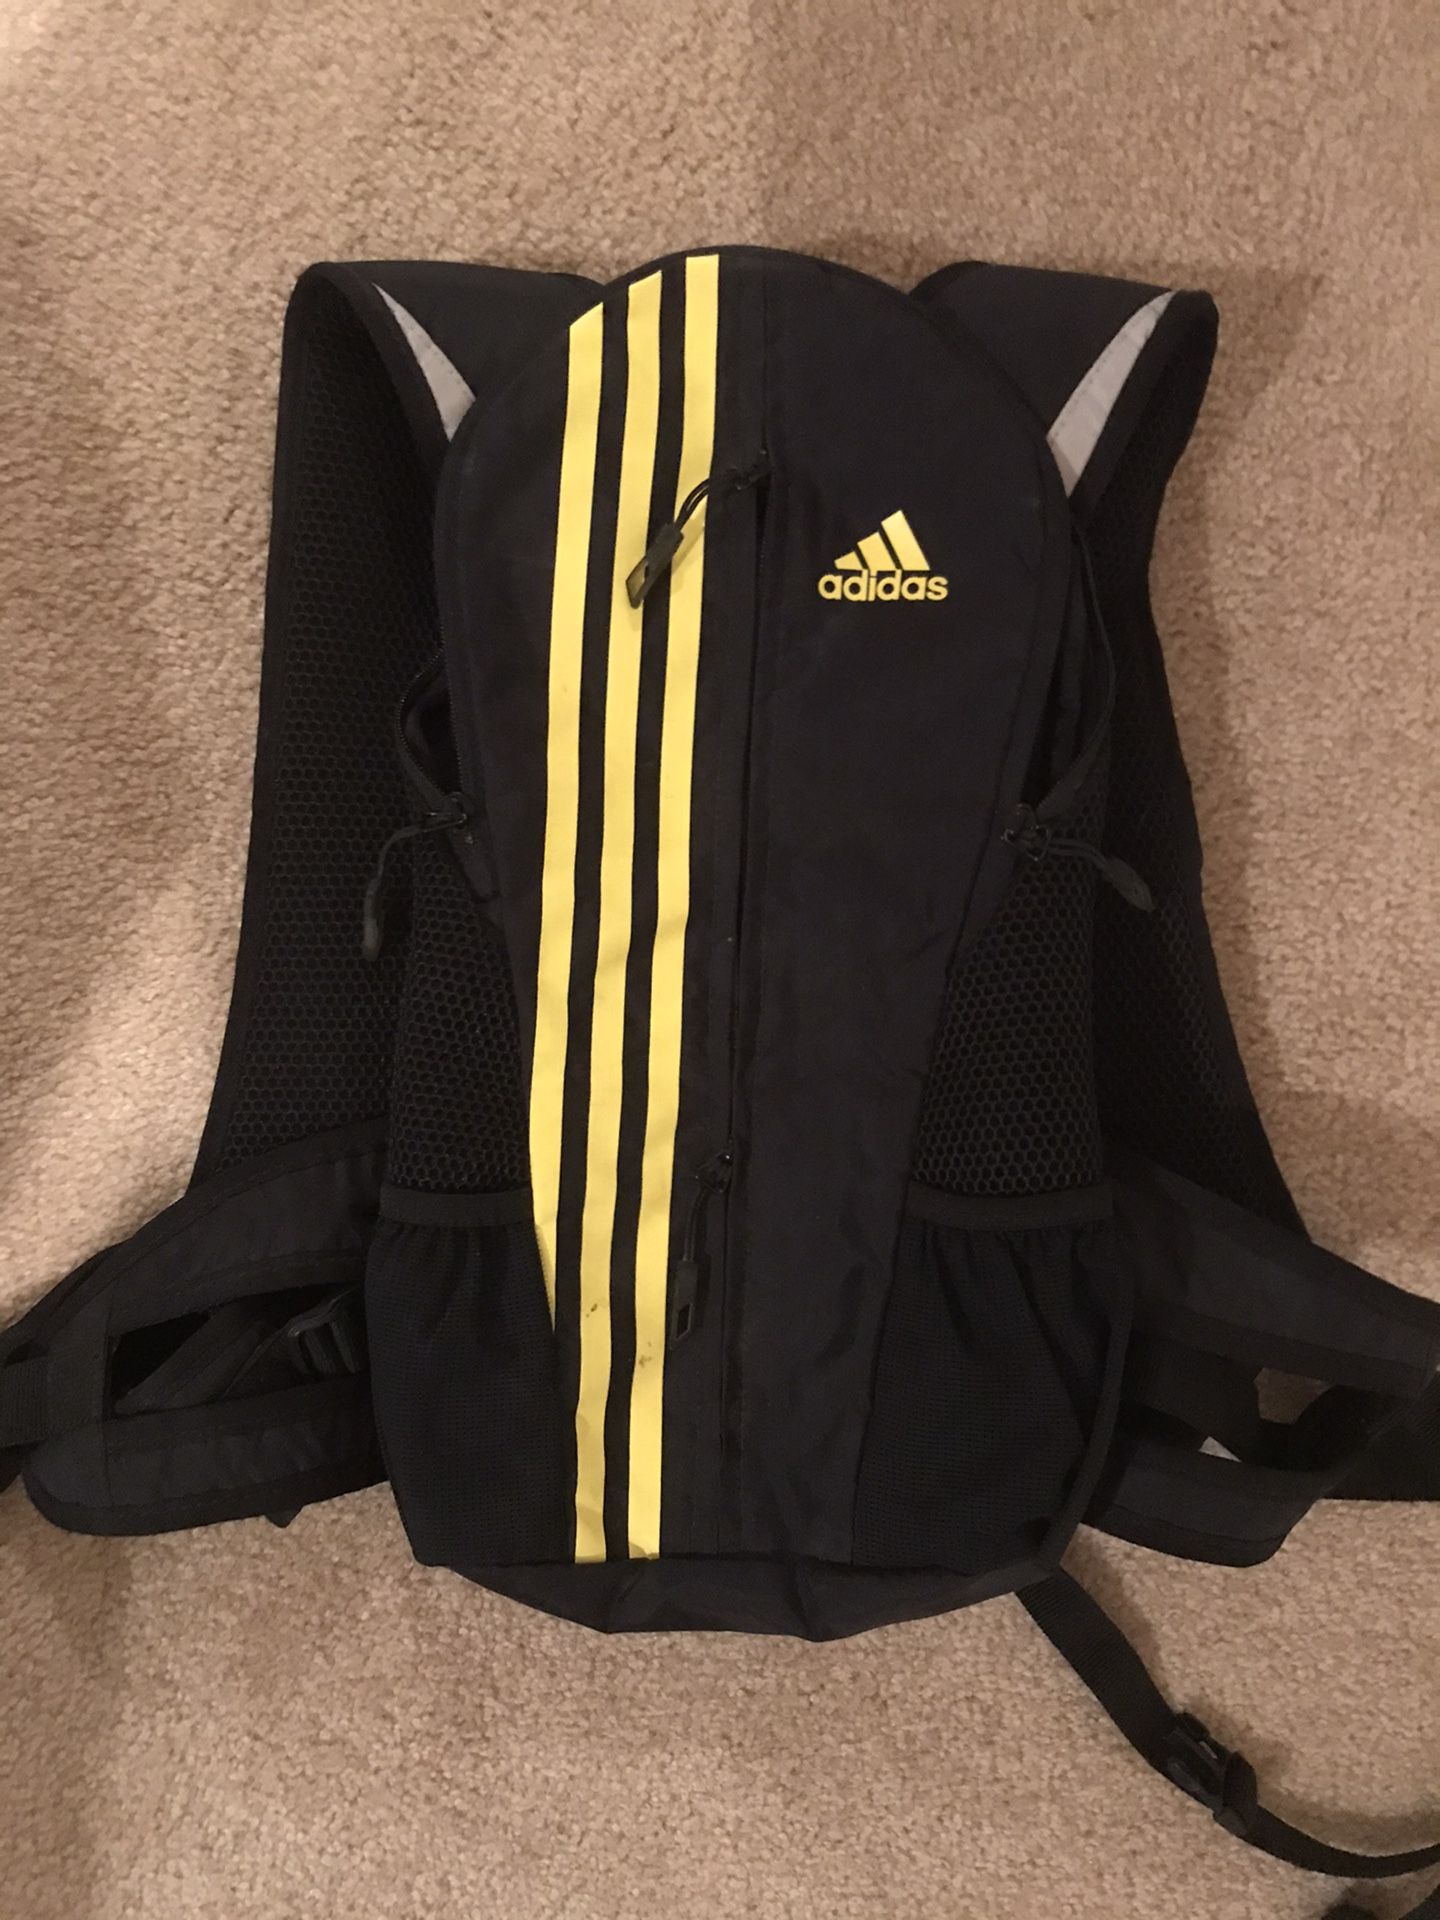 NEW Adidas Clima365 Hydration Pack with Bladder